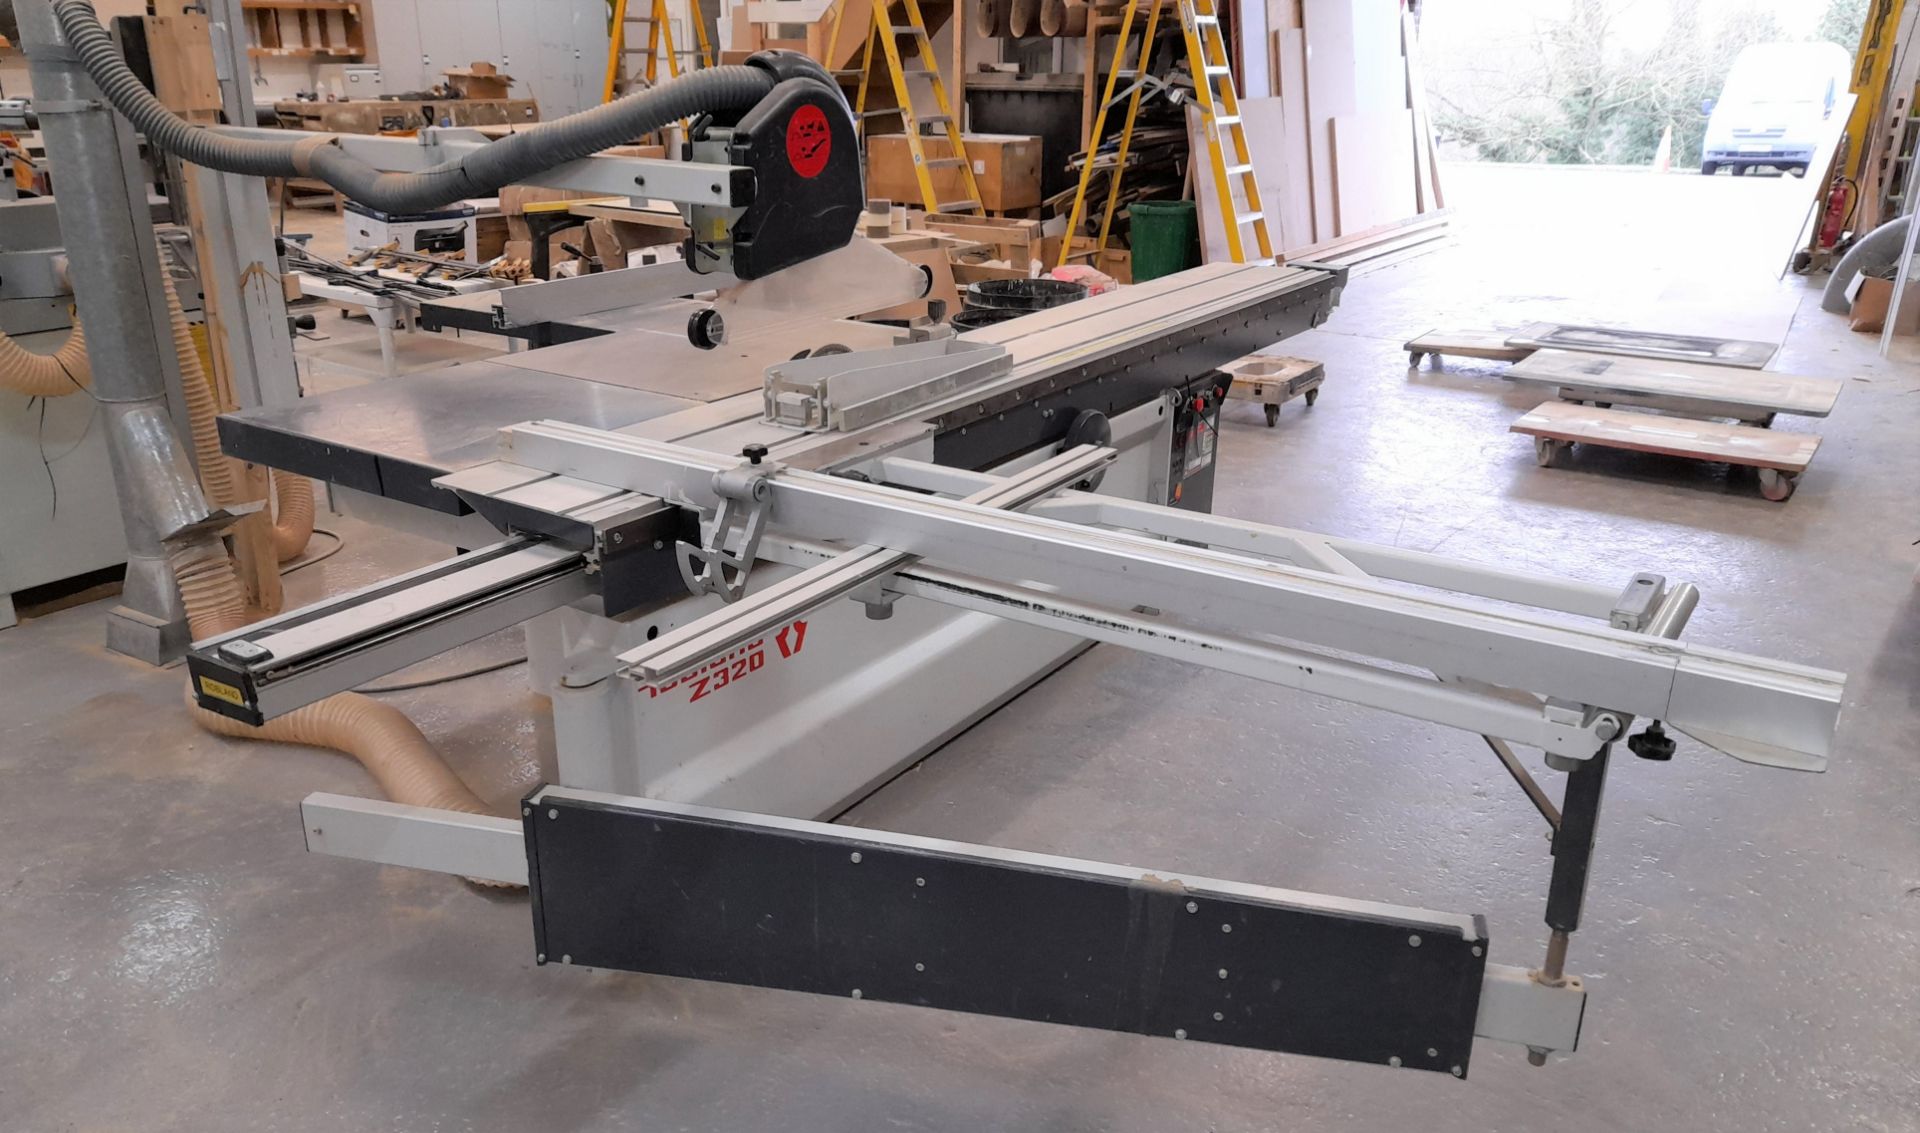 Roland Z320 panel saw, estimated year of manufacture 2005 - Image 3 of 5